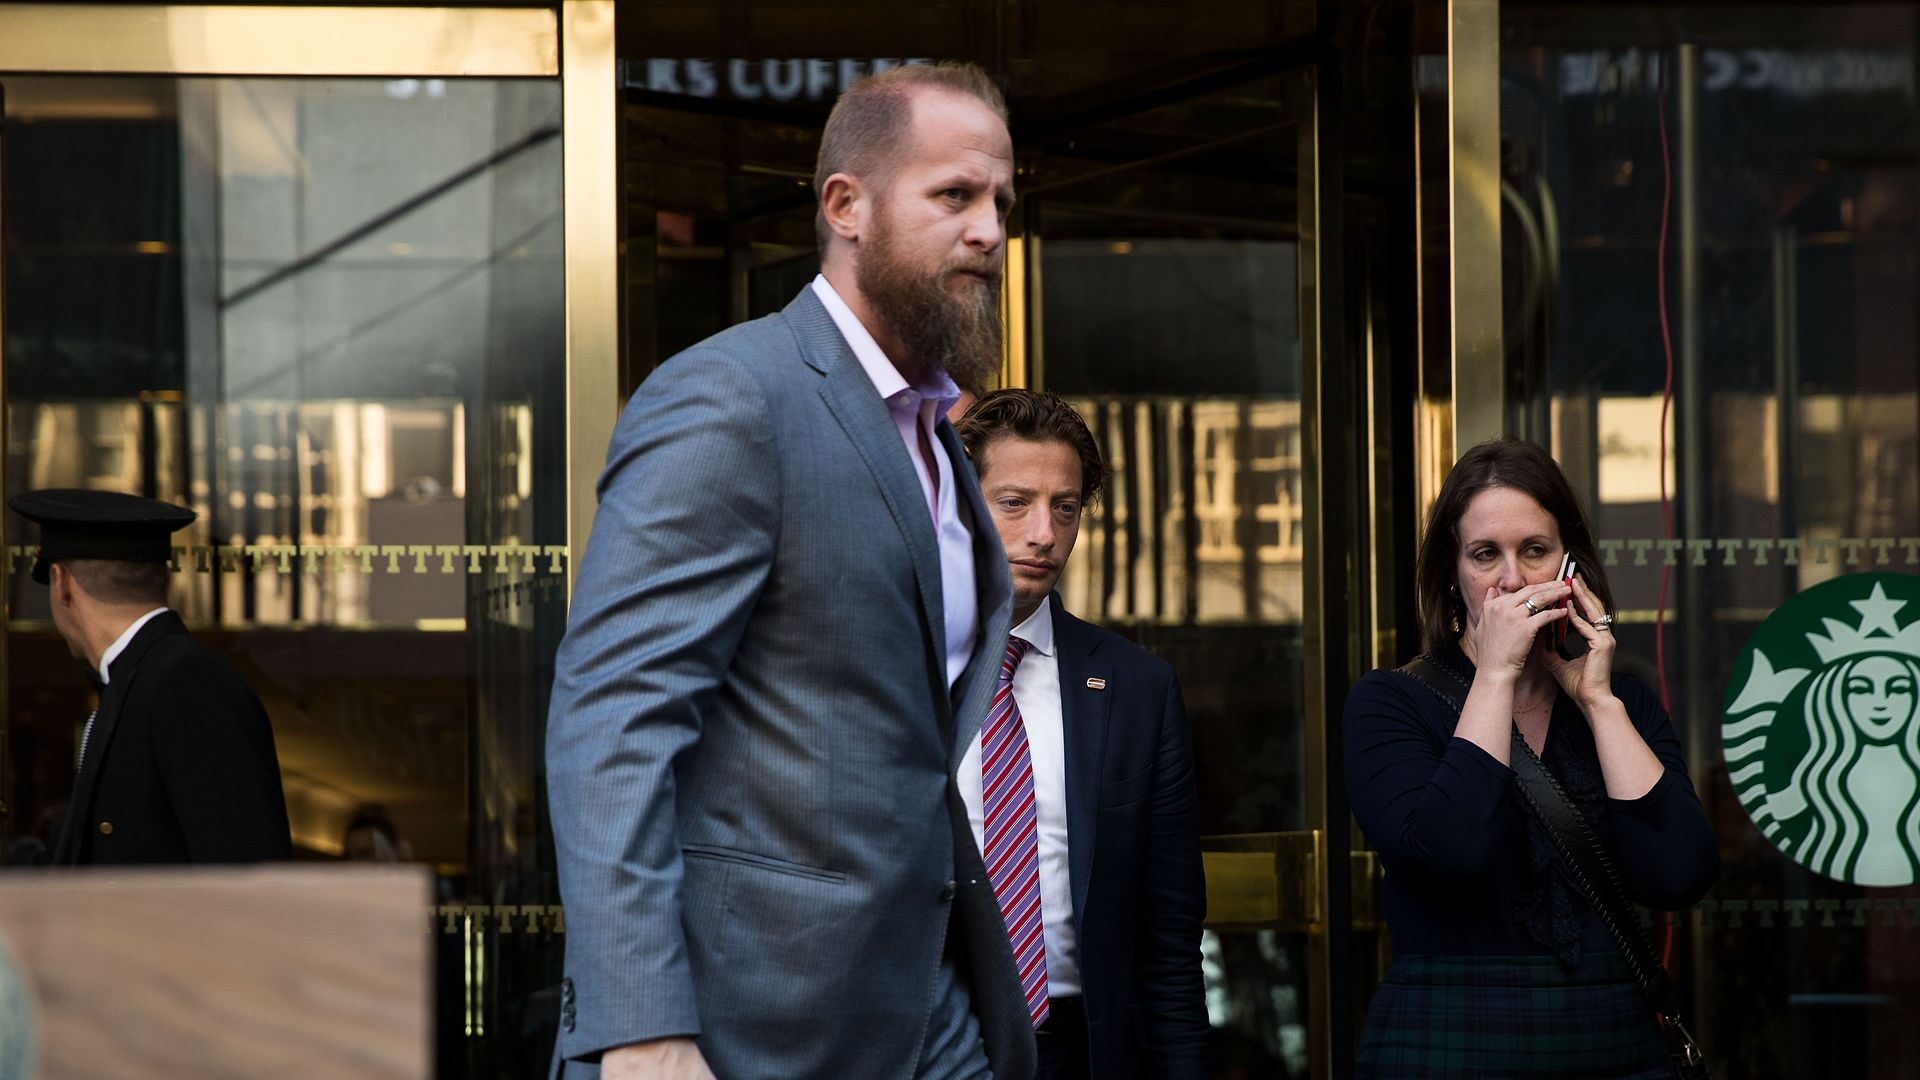 Brad Parscale walking in front of a Starbucks in a grey suit